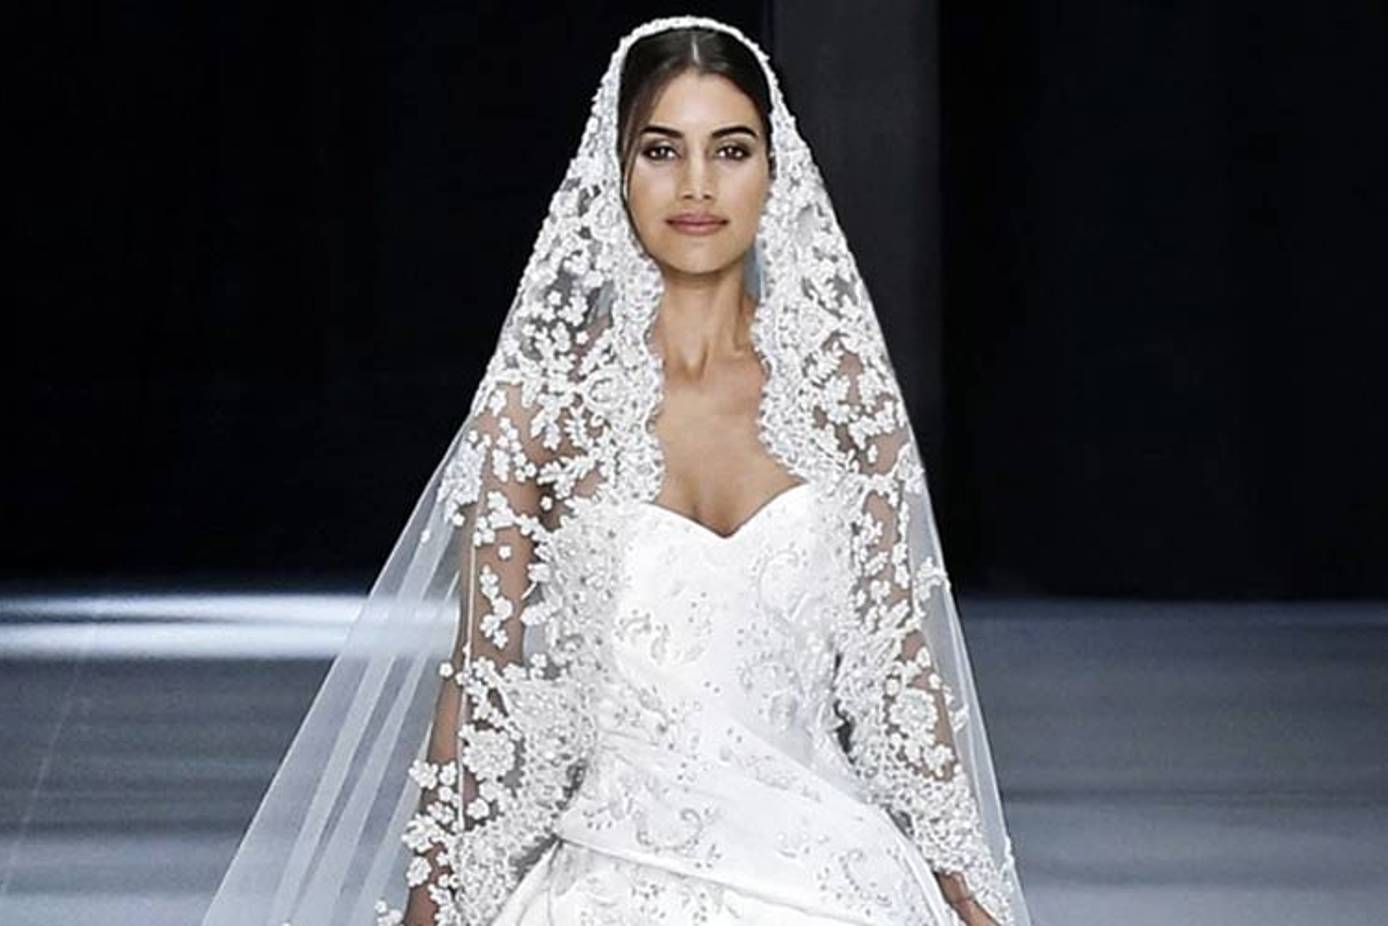 Could Meghan Markle's wedding dress look like this? Ralph and Russo shows  its latest couture collection in Paris